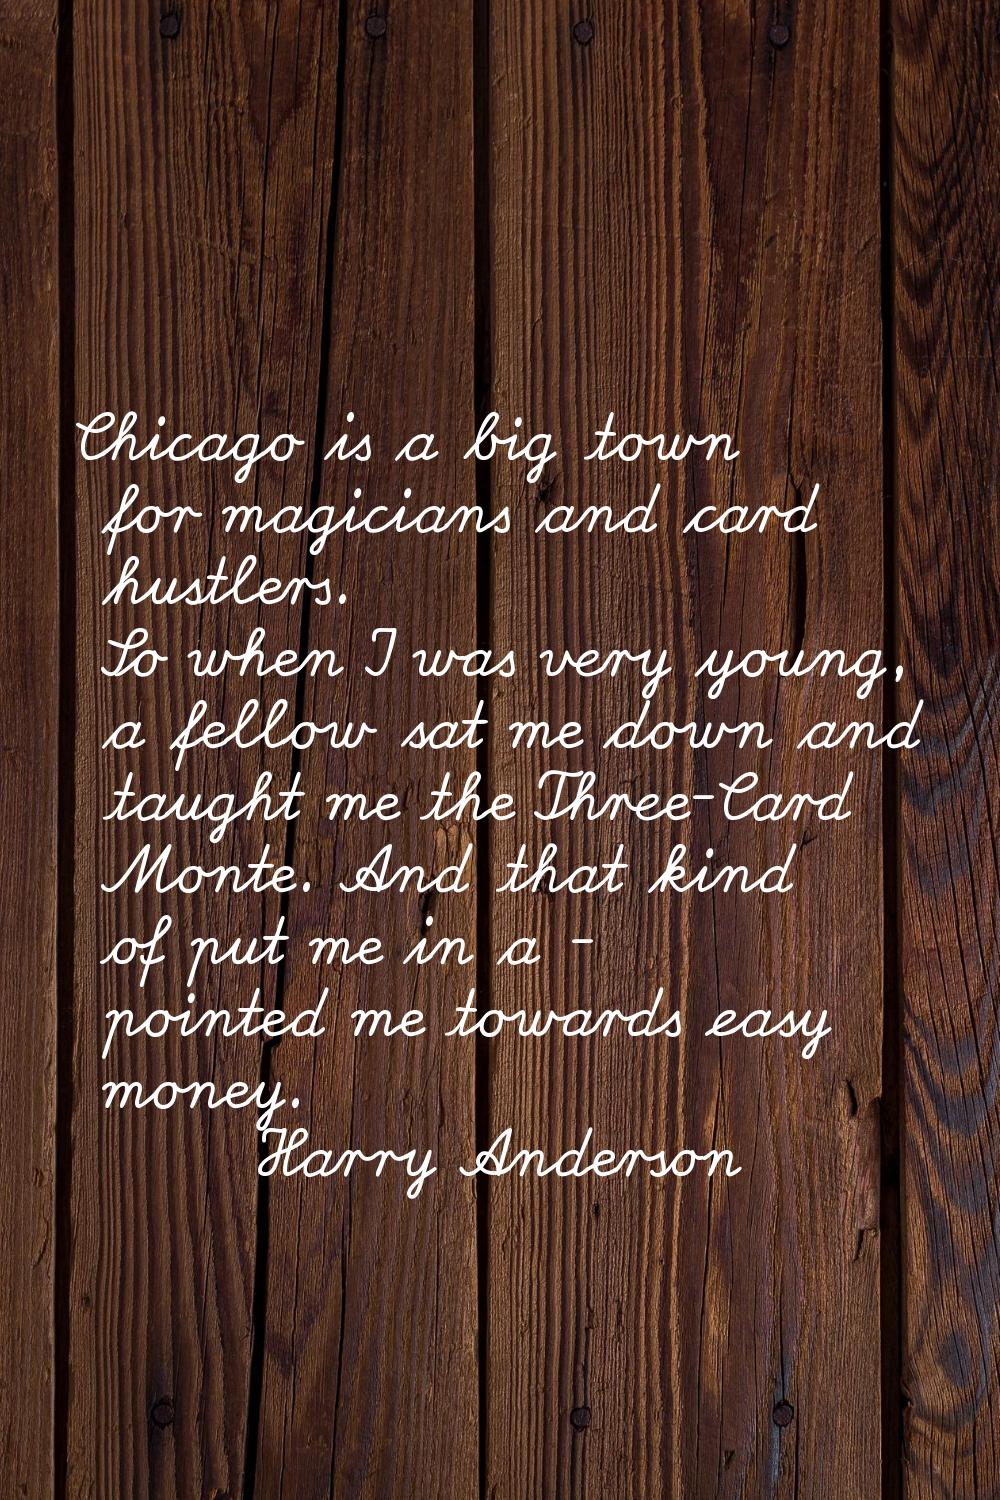 Chicago is a big town for magicians and card hustlers. So when I was very young, a fellow sat me do